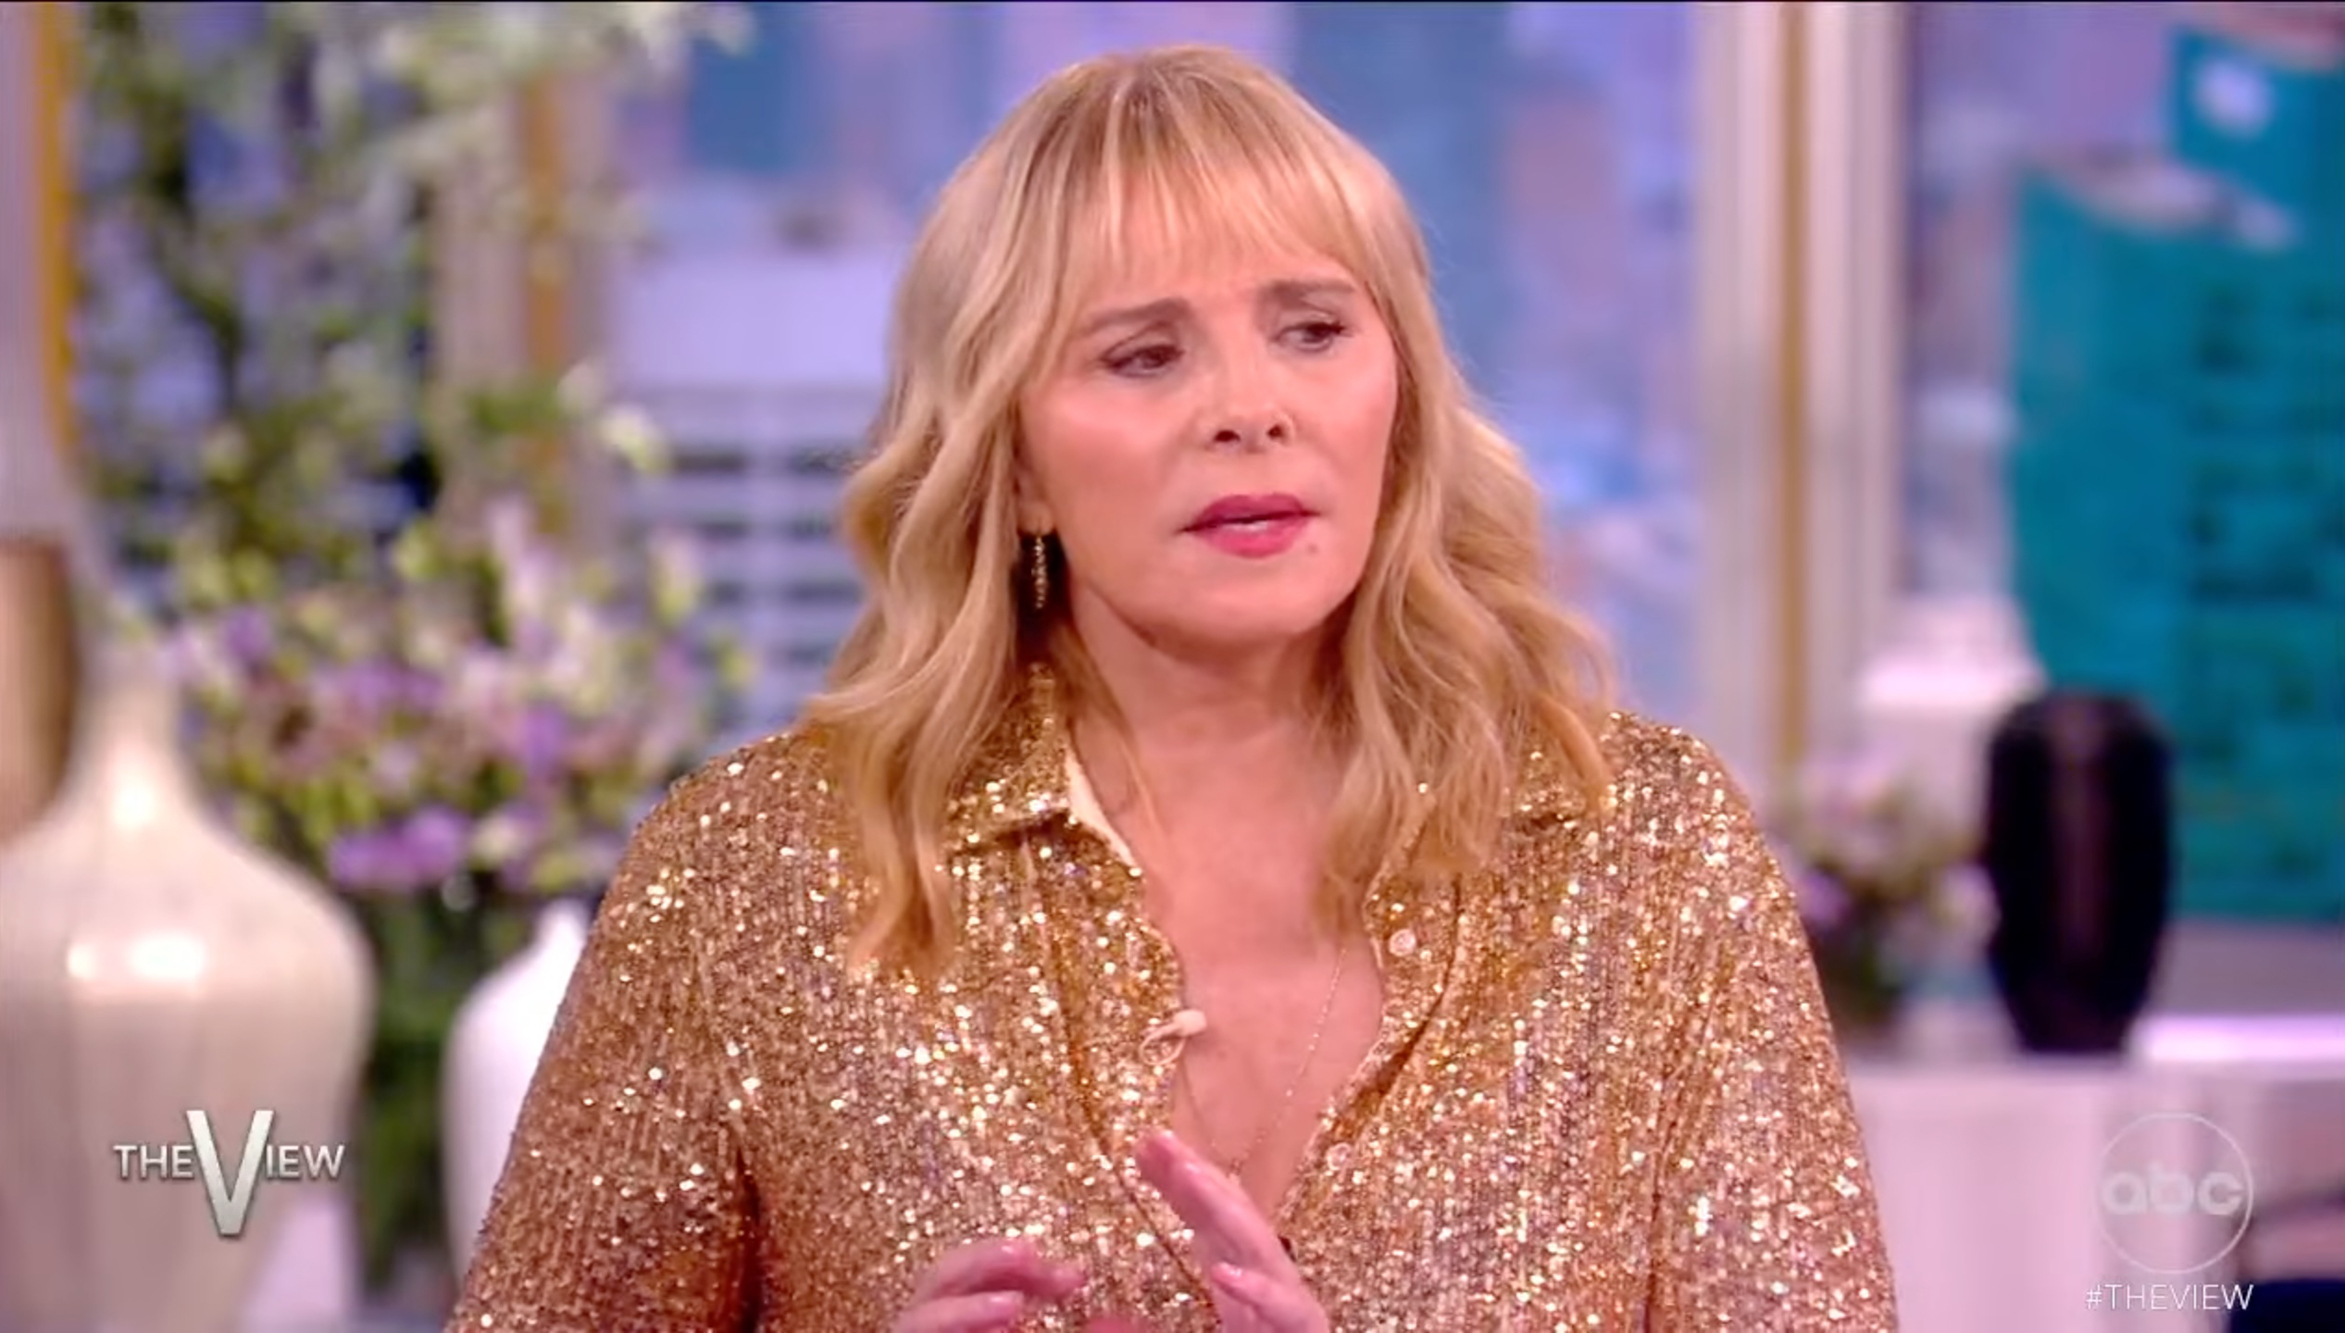 Kim Cattrall On 'And Just Like That...' Cameo & LGBTQ+ Representation In 'Glamorous' | The View

https://www.youtube.com/watch?v=yDtzVO27DIE